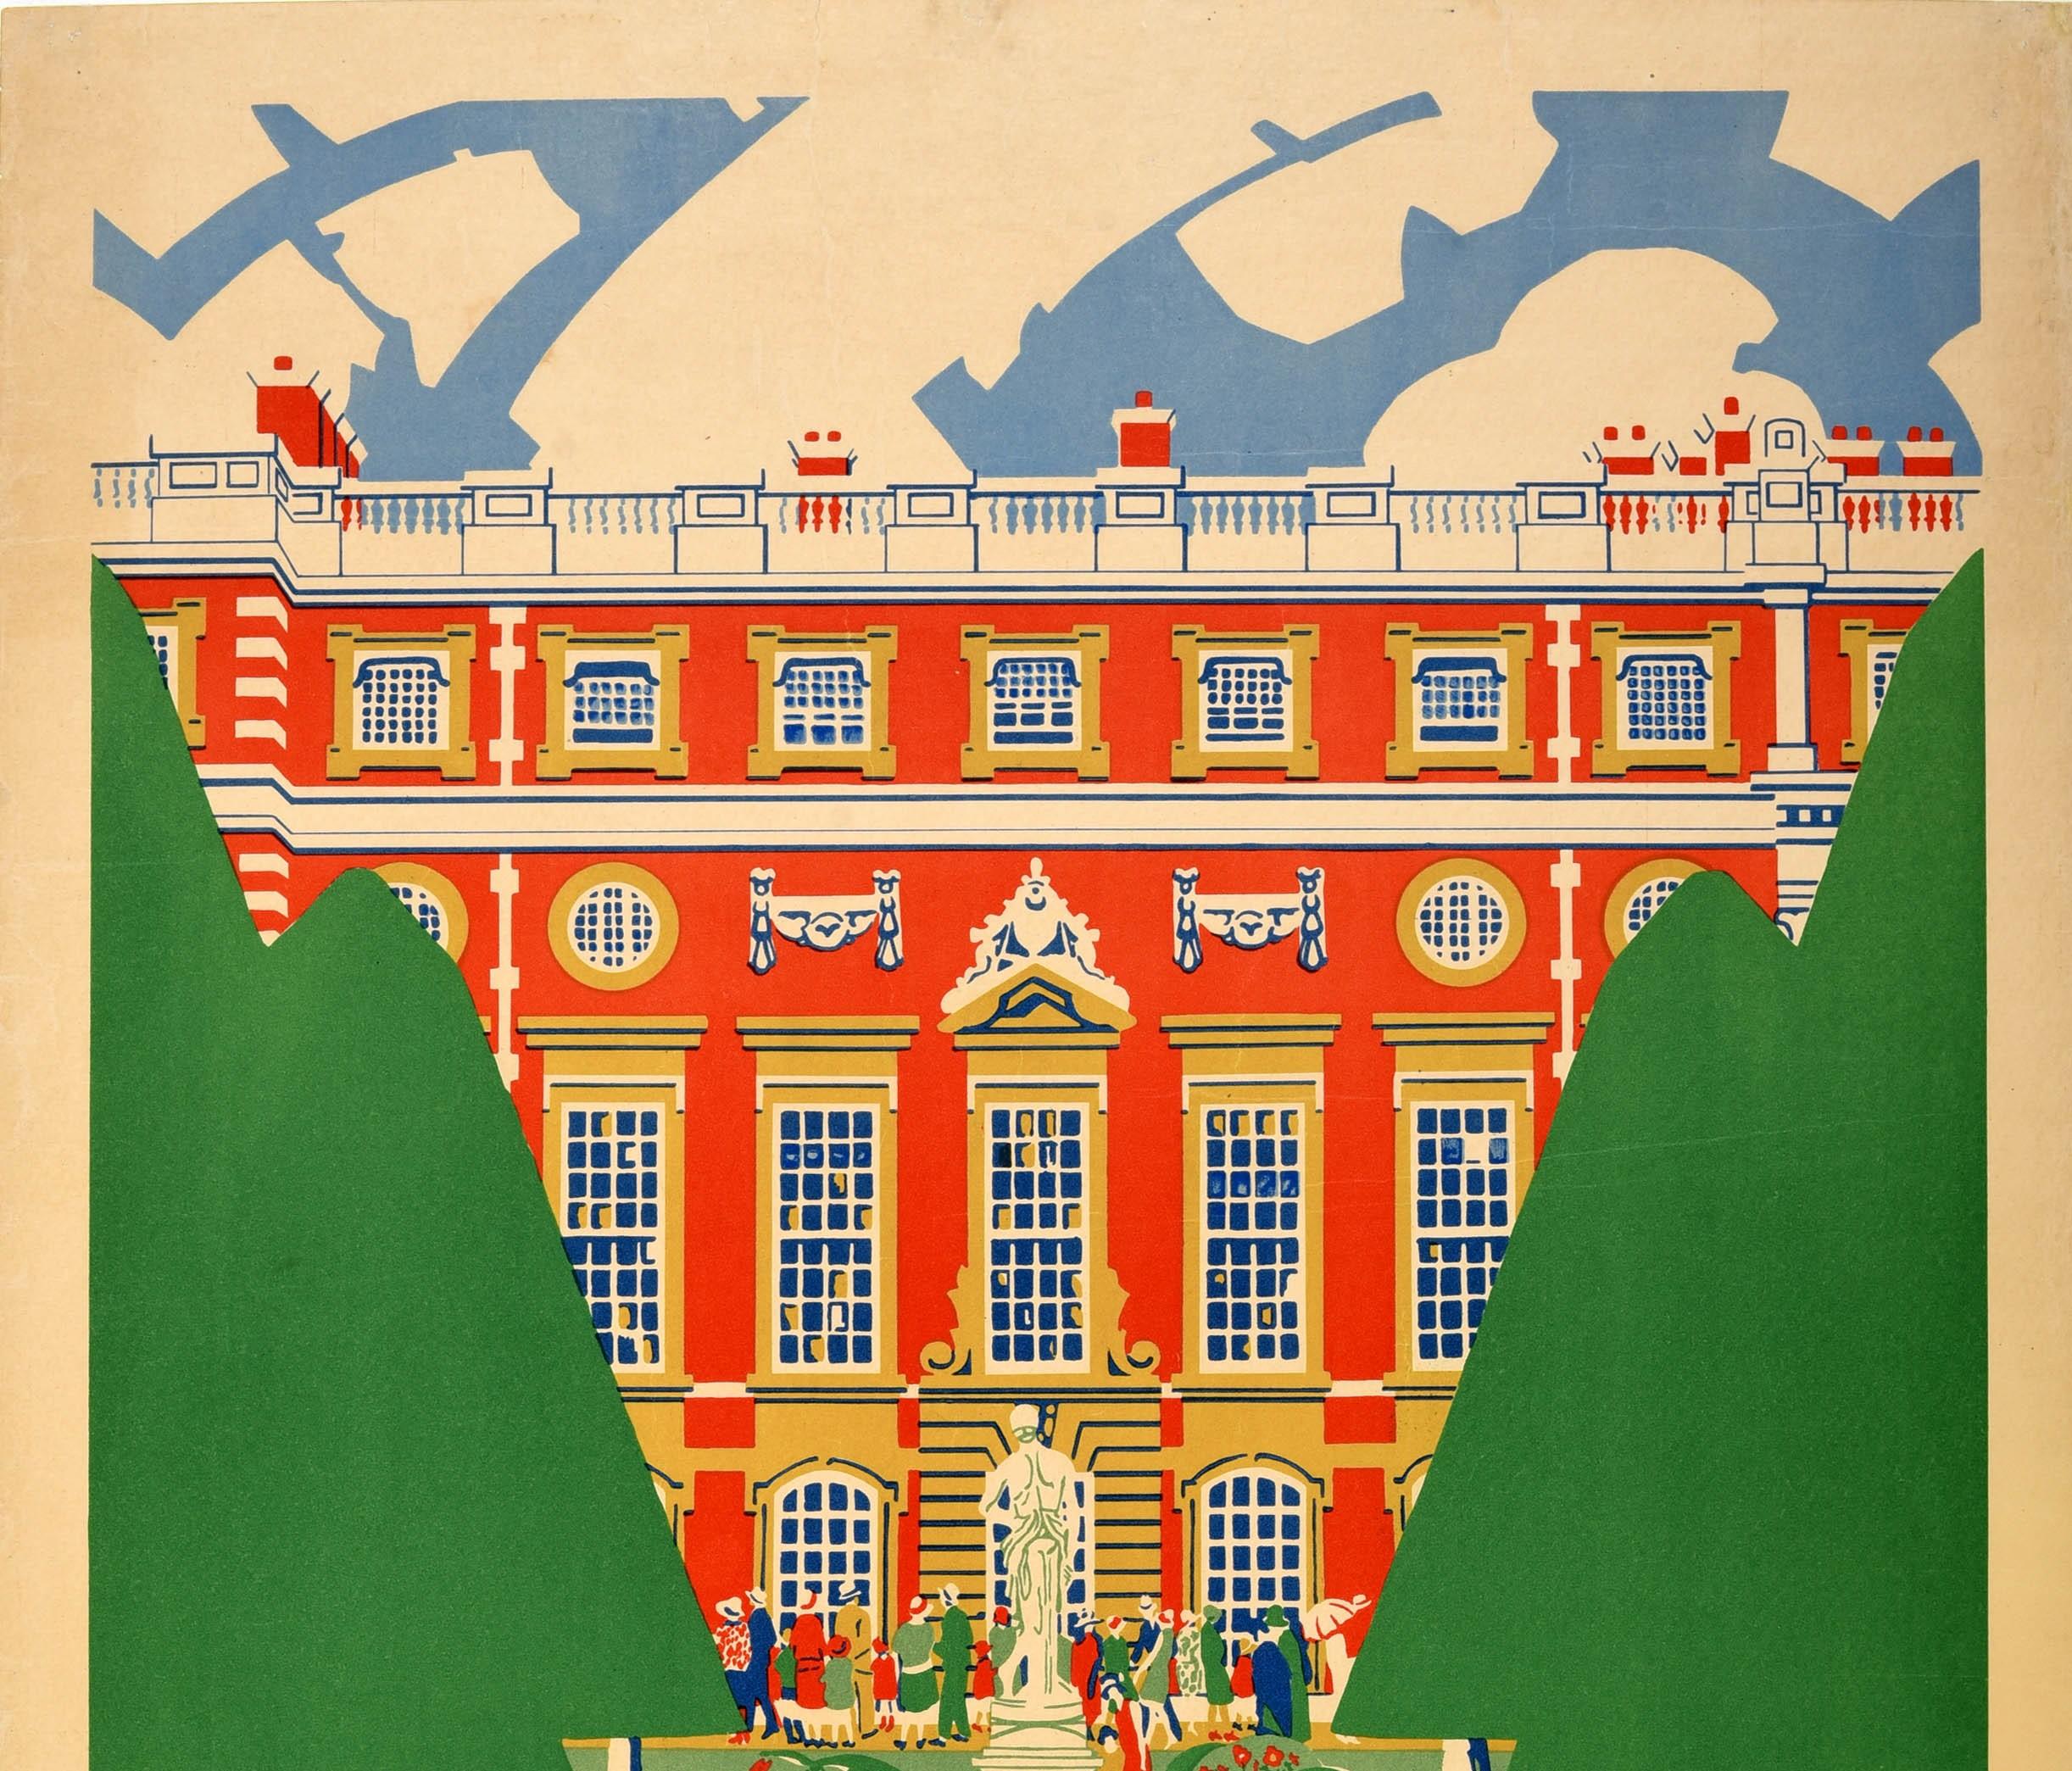 Original Vintage London Transport Poster By Tram to Hampton Court Royal Palace - Print by Dorothy Paton